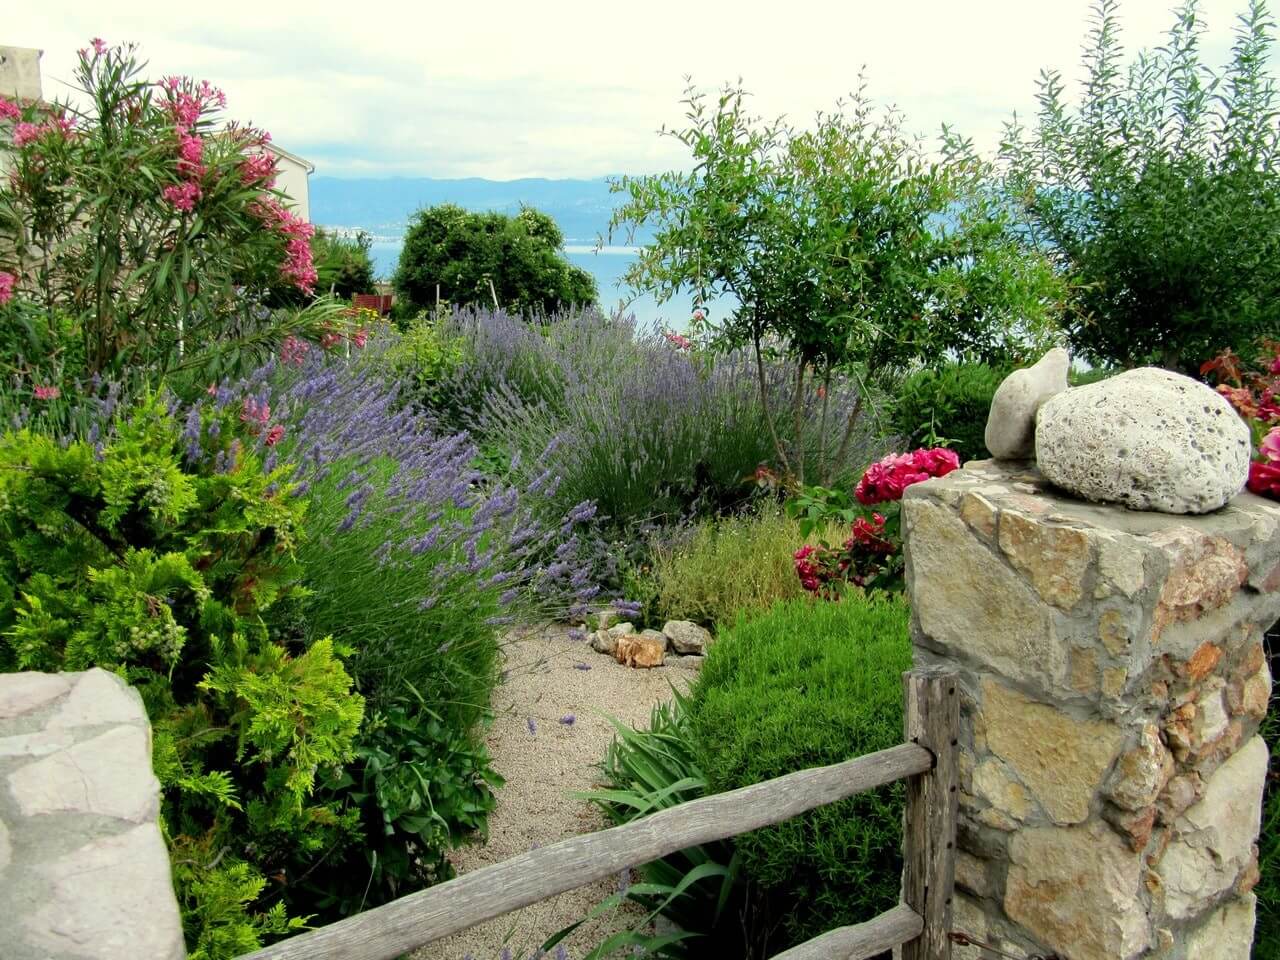 view of the Mediterranean Sea with in the foreground a garden planted with oleanders, lavender and thujas.